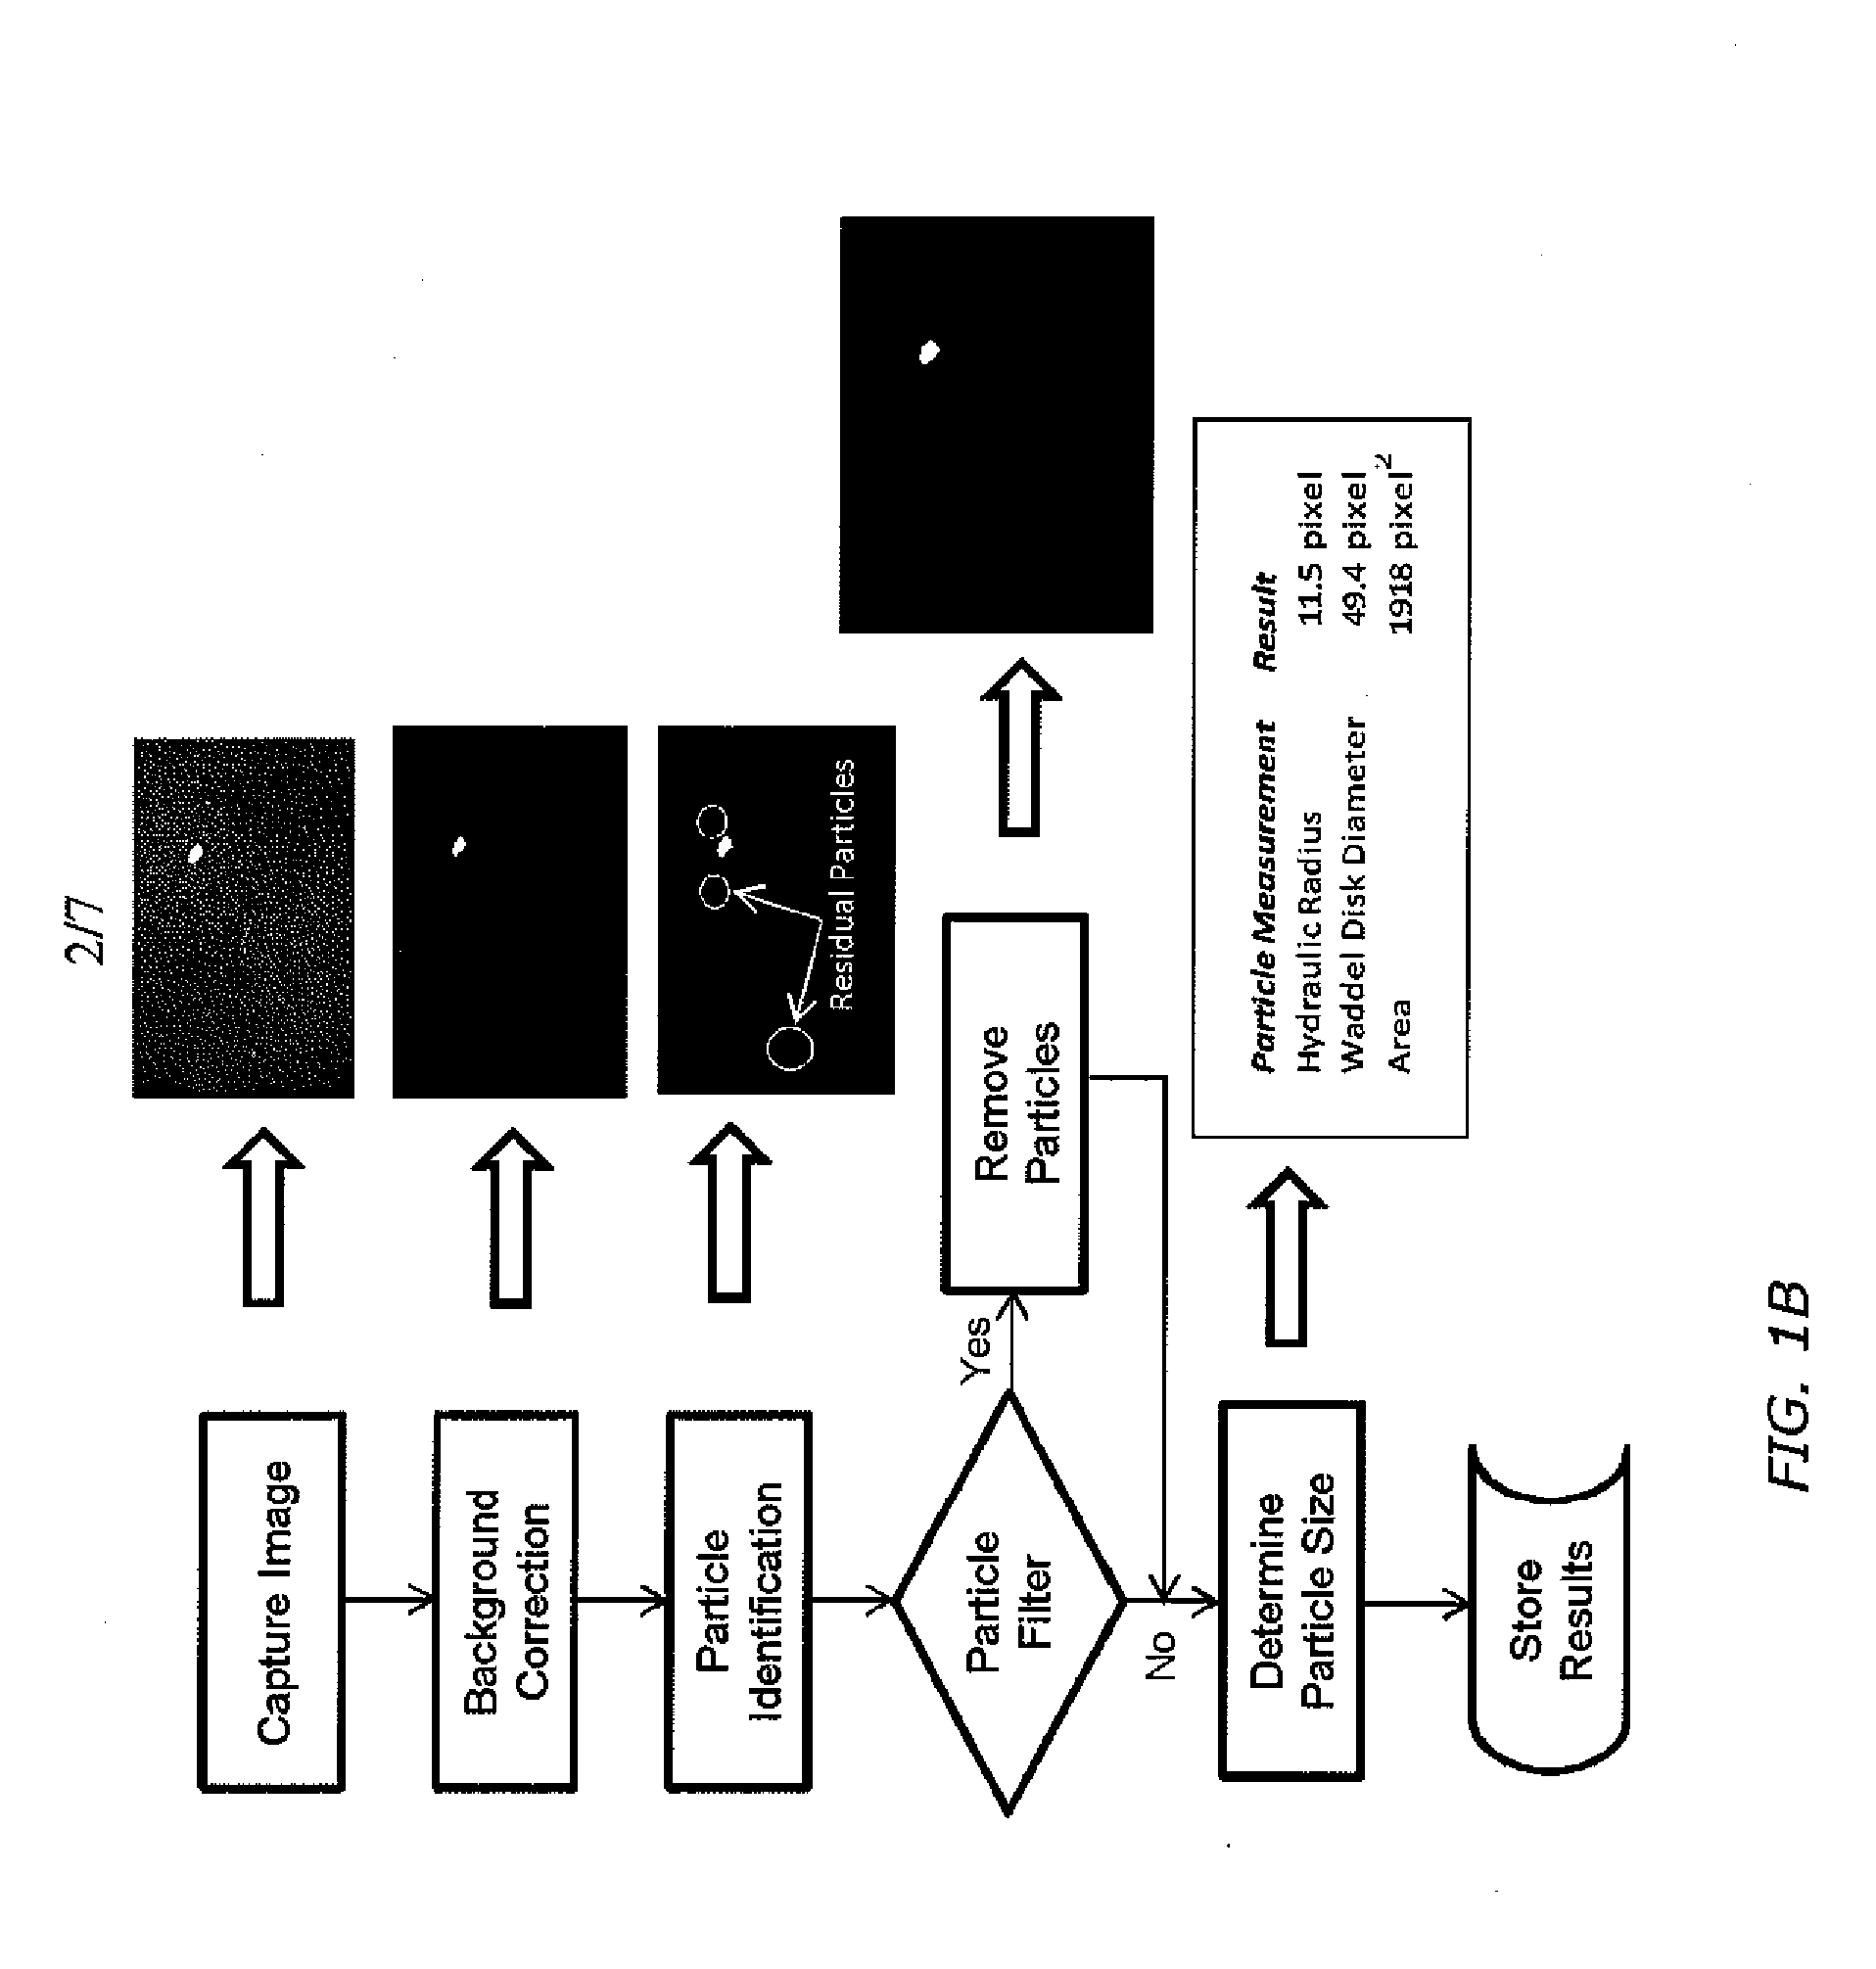 Method of monitoring macrostickies in a recycling and paper or tissue making process involving recycled pulp